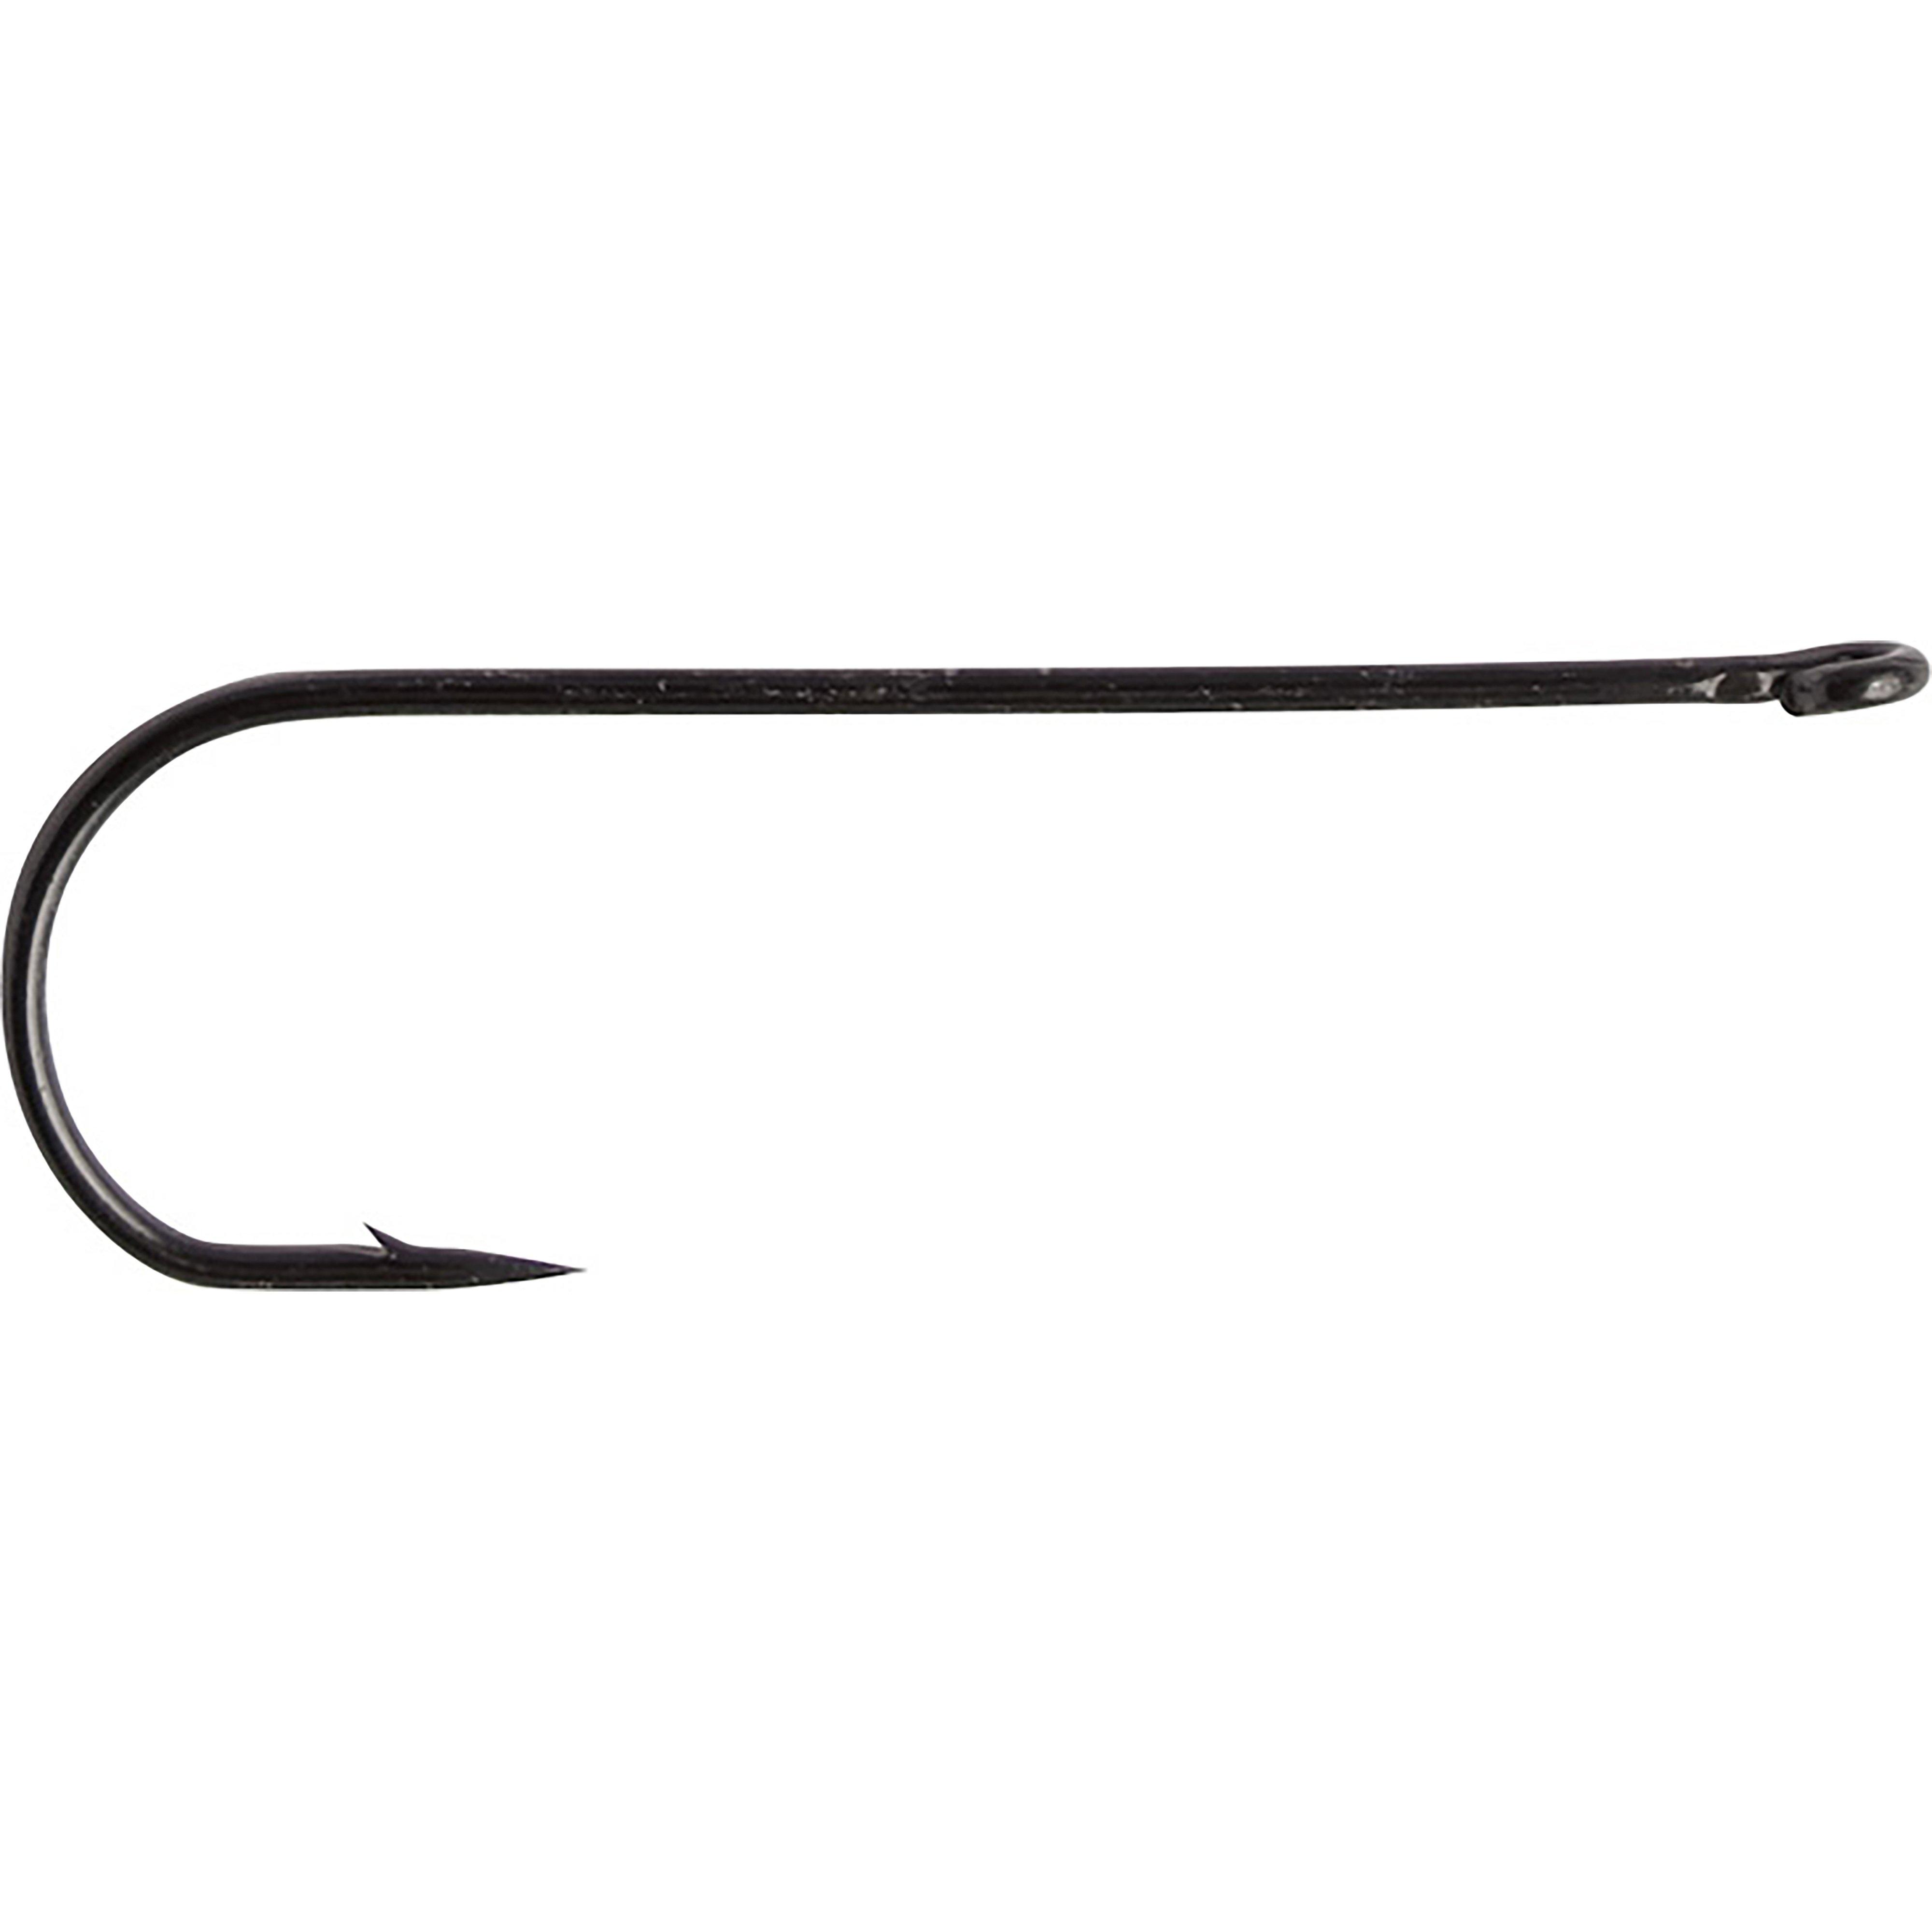 tessuti Aberdeen Size 2 Barbed Hooks Review